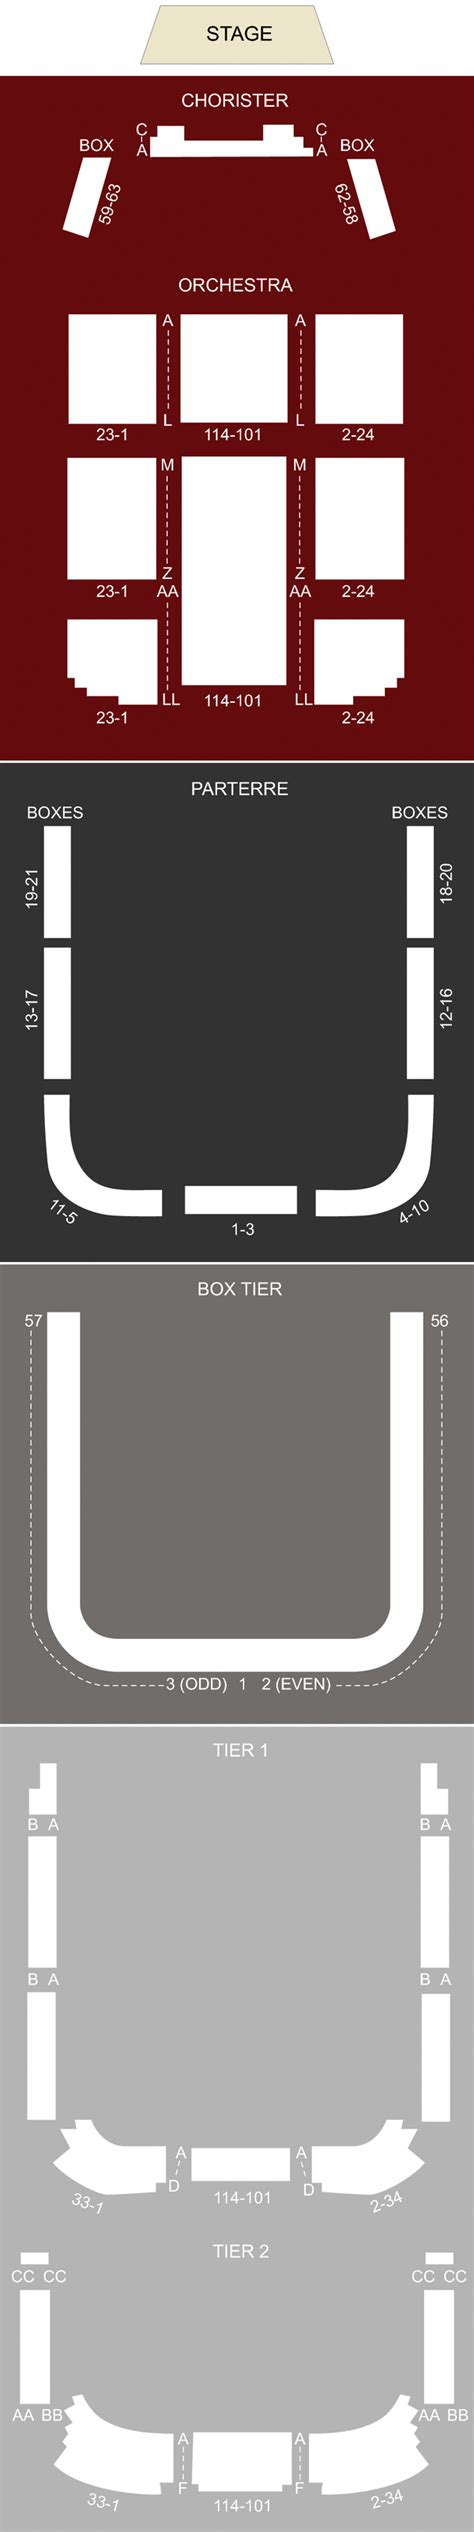 Kennedy Center Opera House Seating Chart With Numbers Cabinets Matttroy